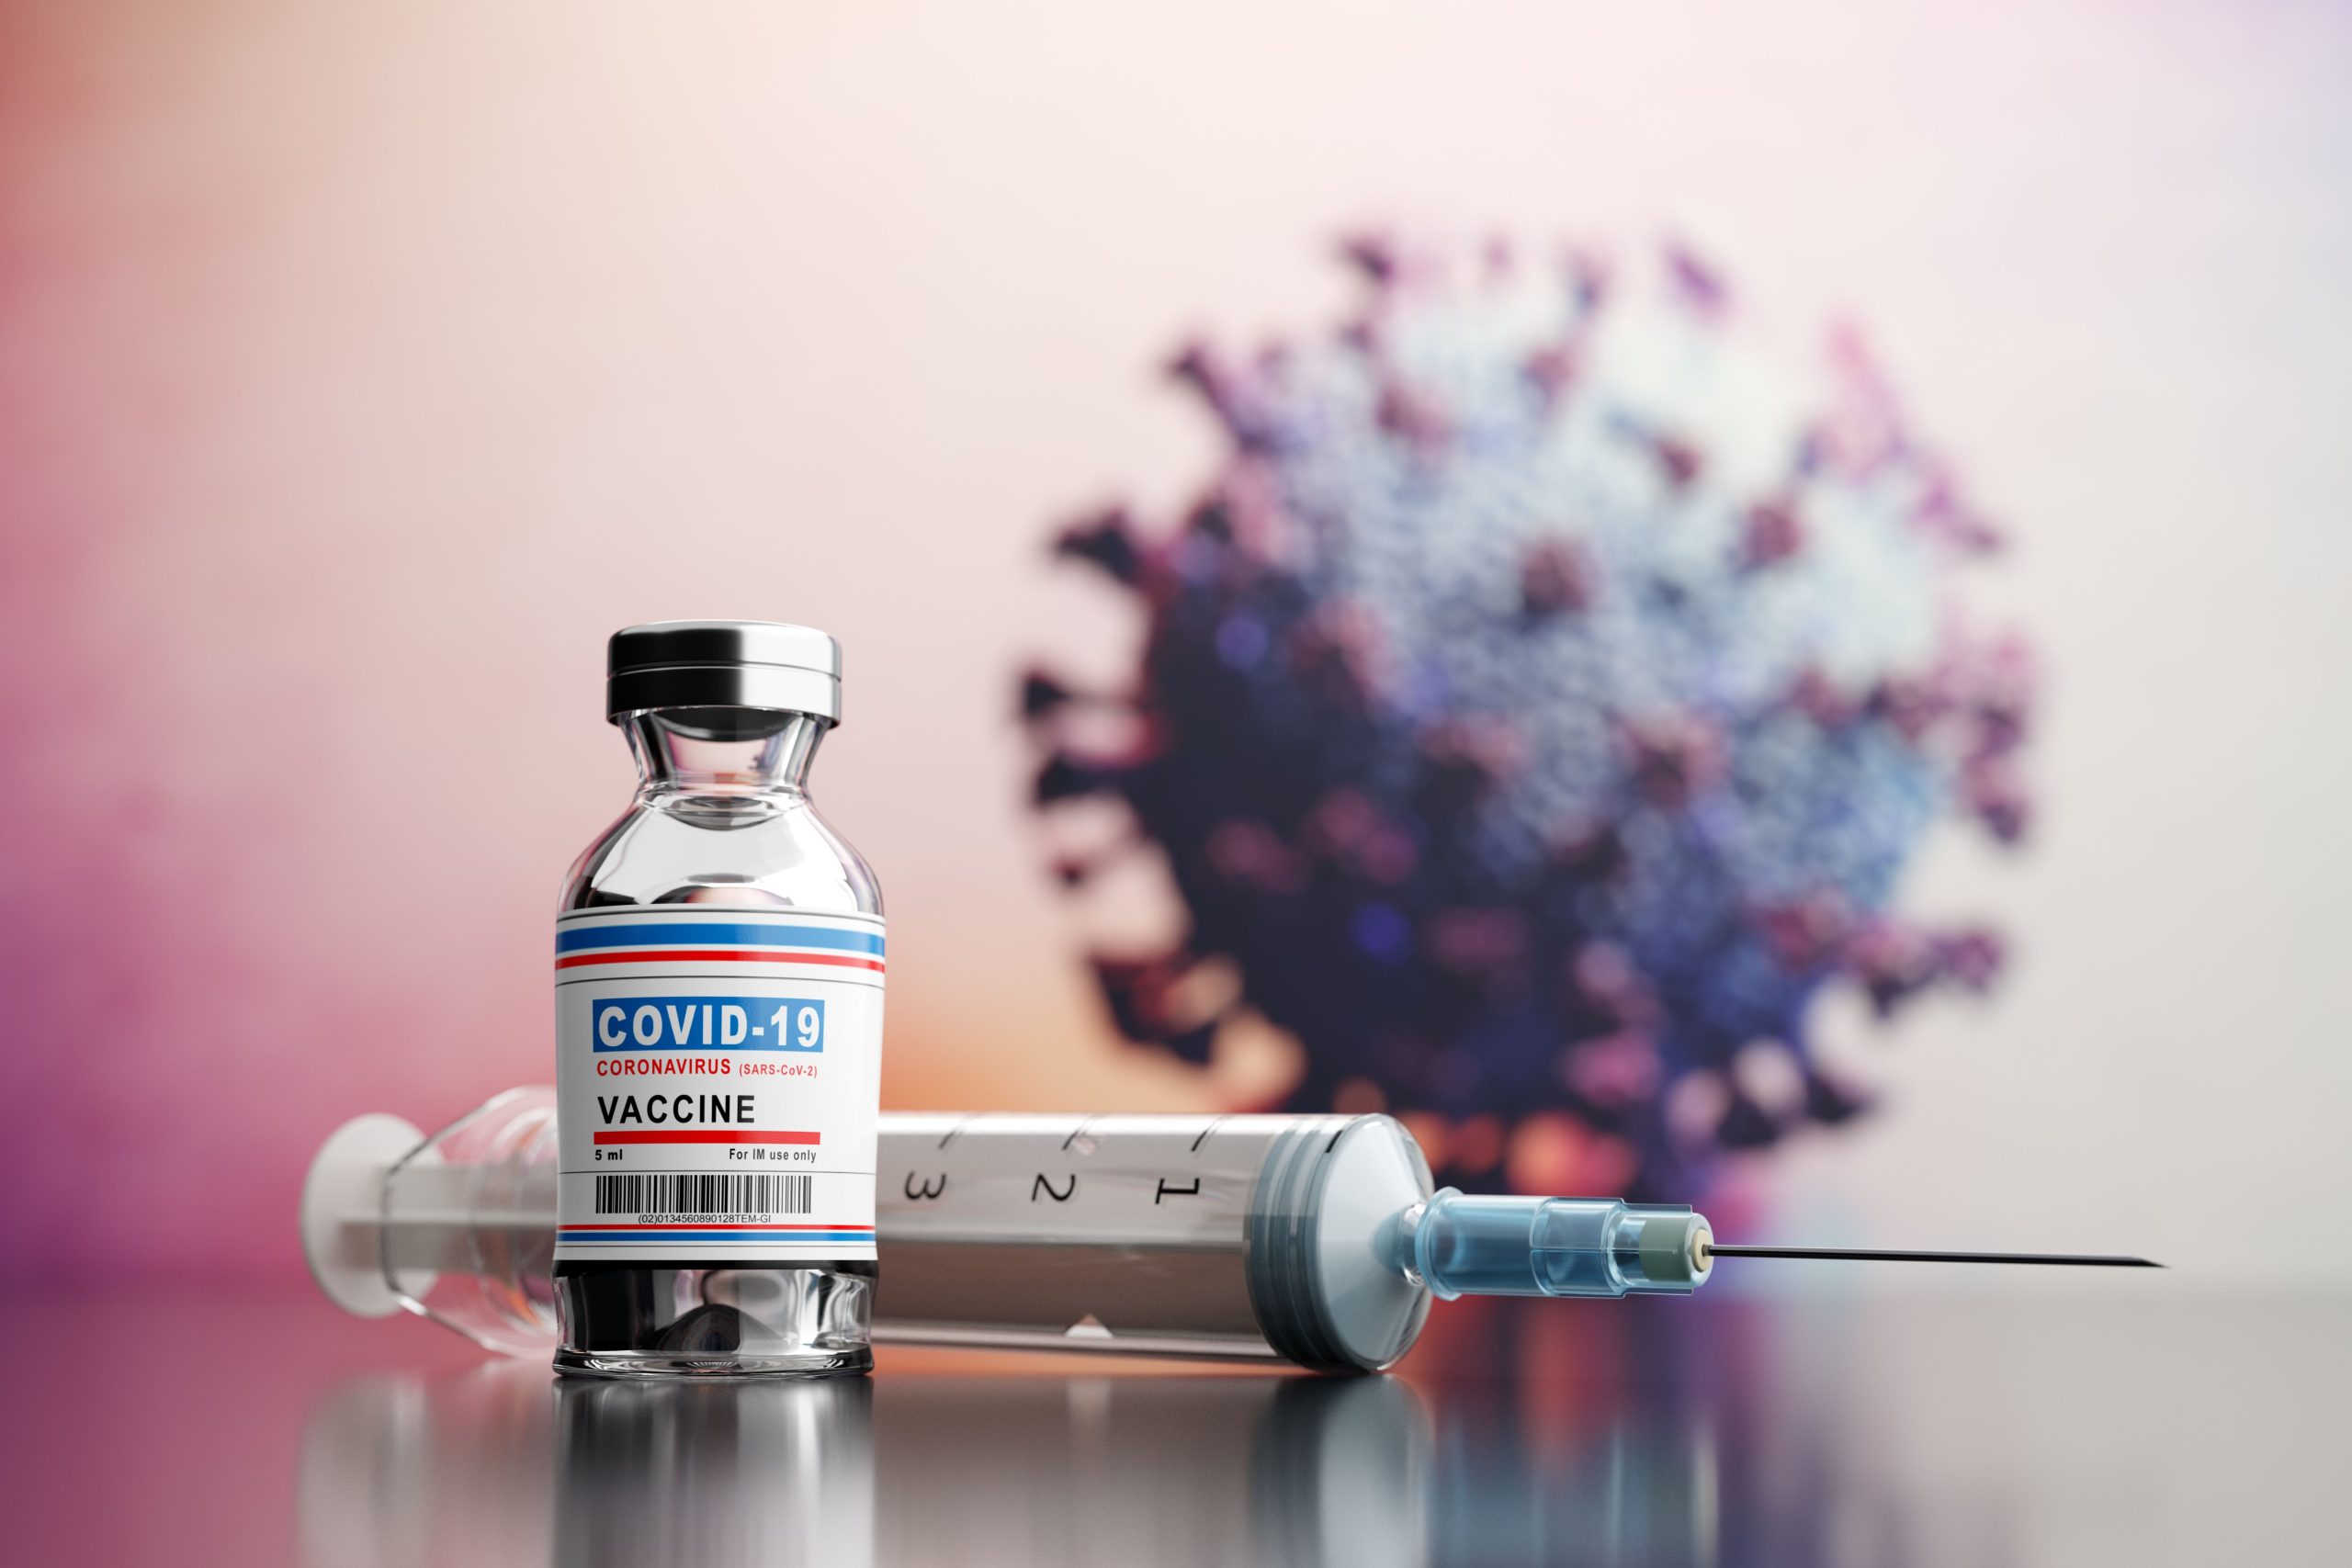 vaccine and syringe placed on surface with a germ in the background